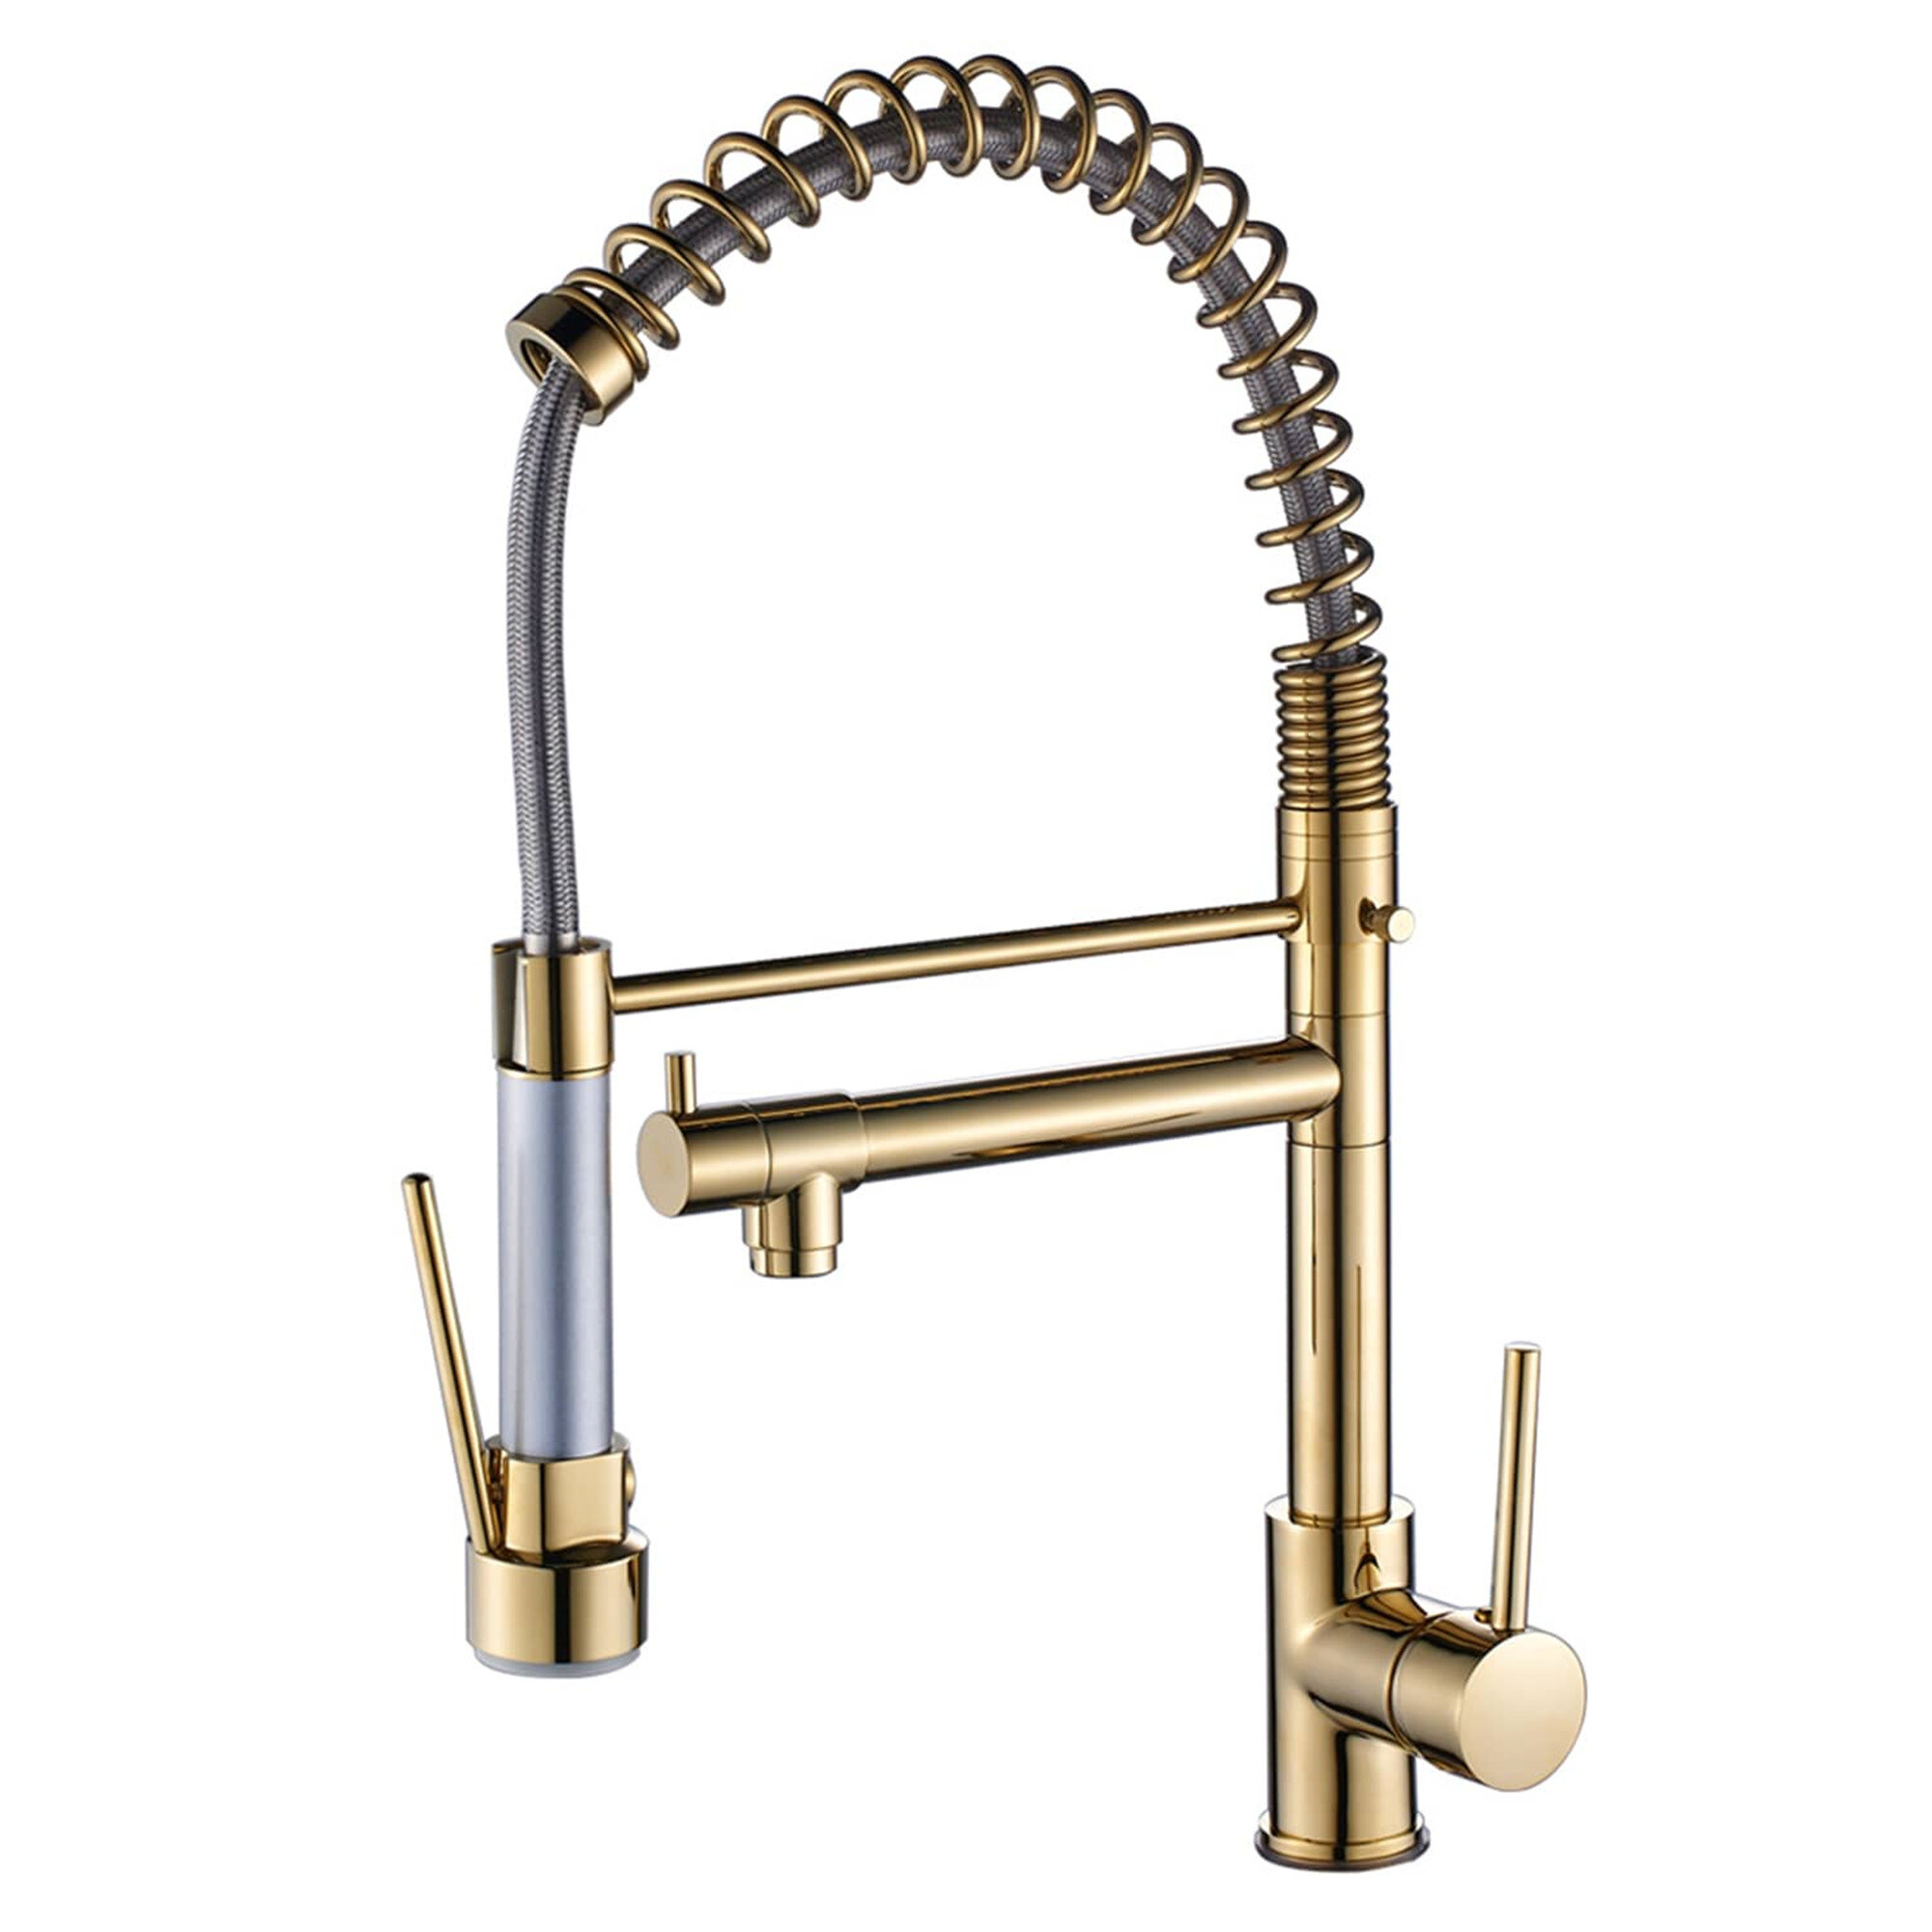 Commercial Pull Down Kitchen Sink Faucet Modern Brass Single Hole Kitchen  Faucets Single Handle High Arc Mixer Faucets With Valve